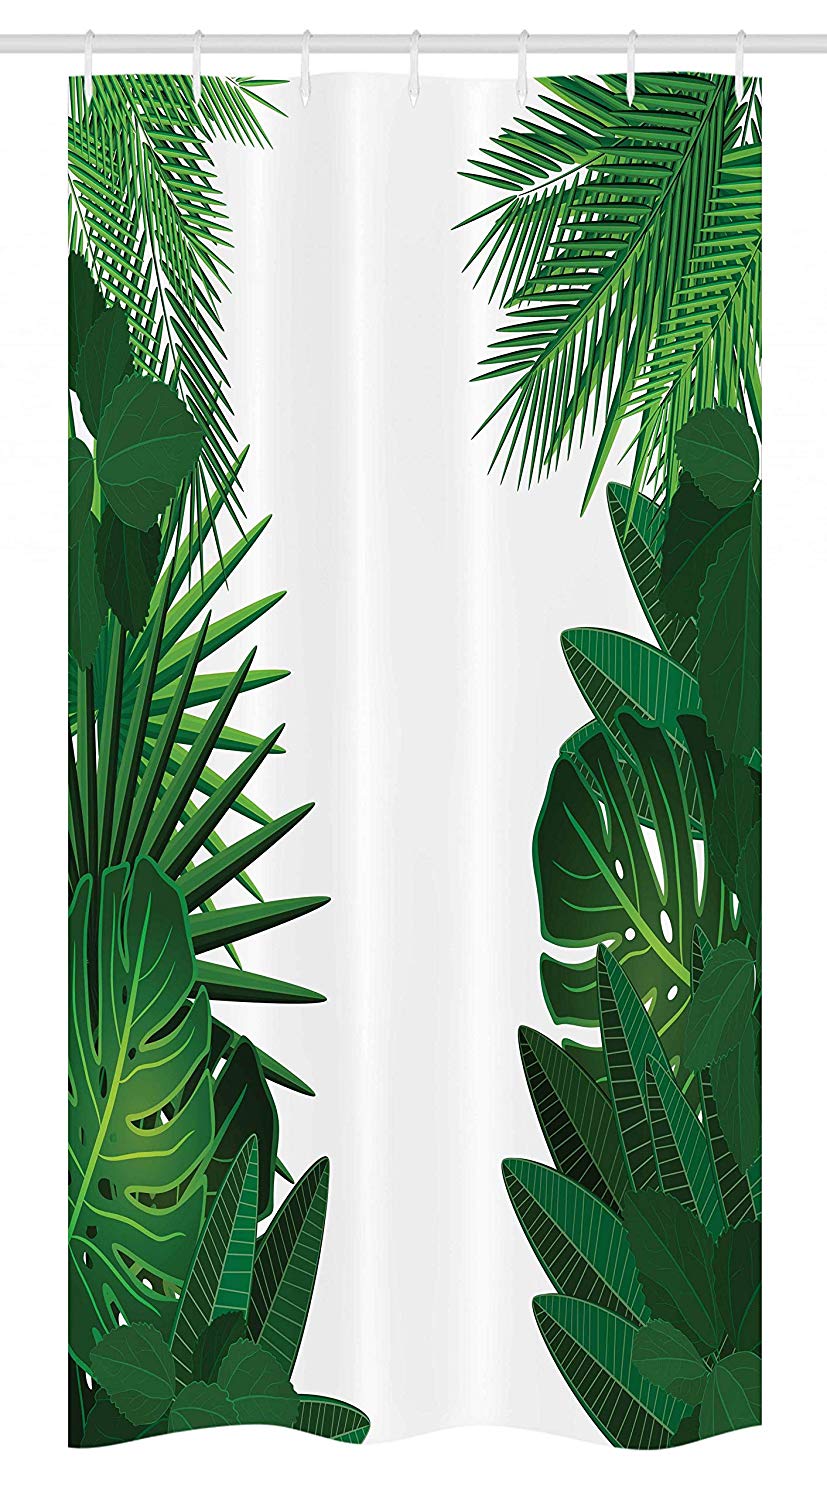 Ambesonne Leaf Stall Shower Curtain, Exotic Fantasy Hawaiian Tropical Palm Leaves with Floral Graphic Artwork Print, Fabric Bathroom Decor Set with Hooks, 36" X 72", Green White